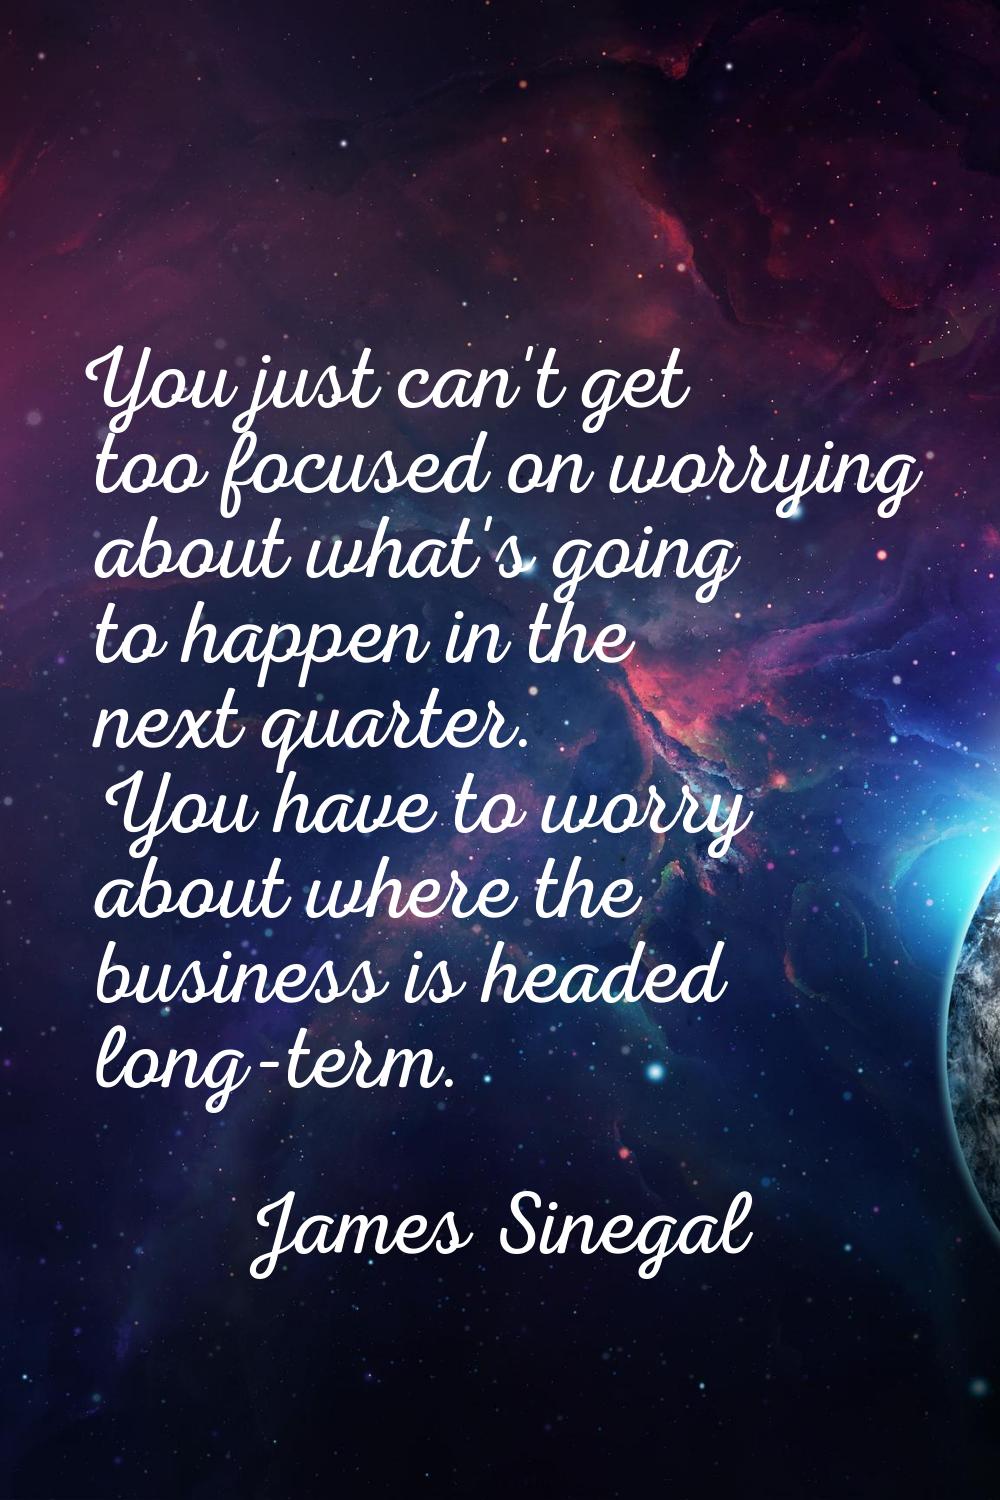 You just can't get too focused on worrying about what's going to happen in the next quarter. You ha